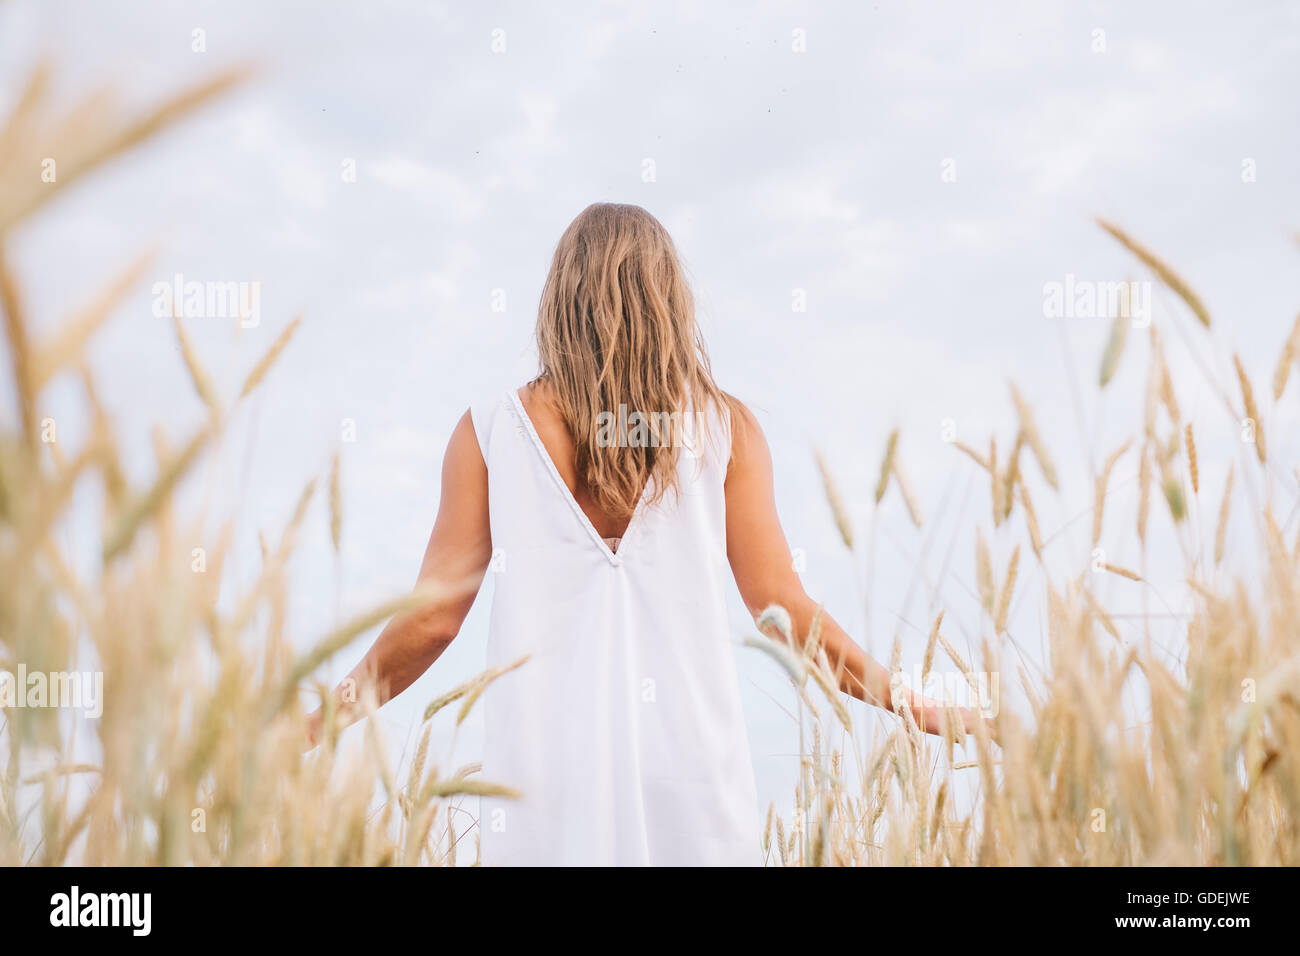 Rear view of woman standing in wheat field Stock Photo